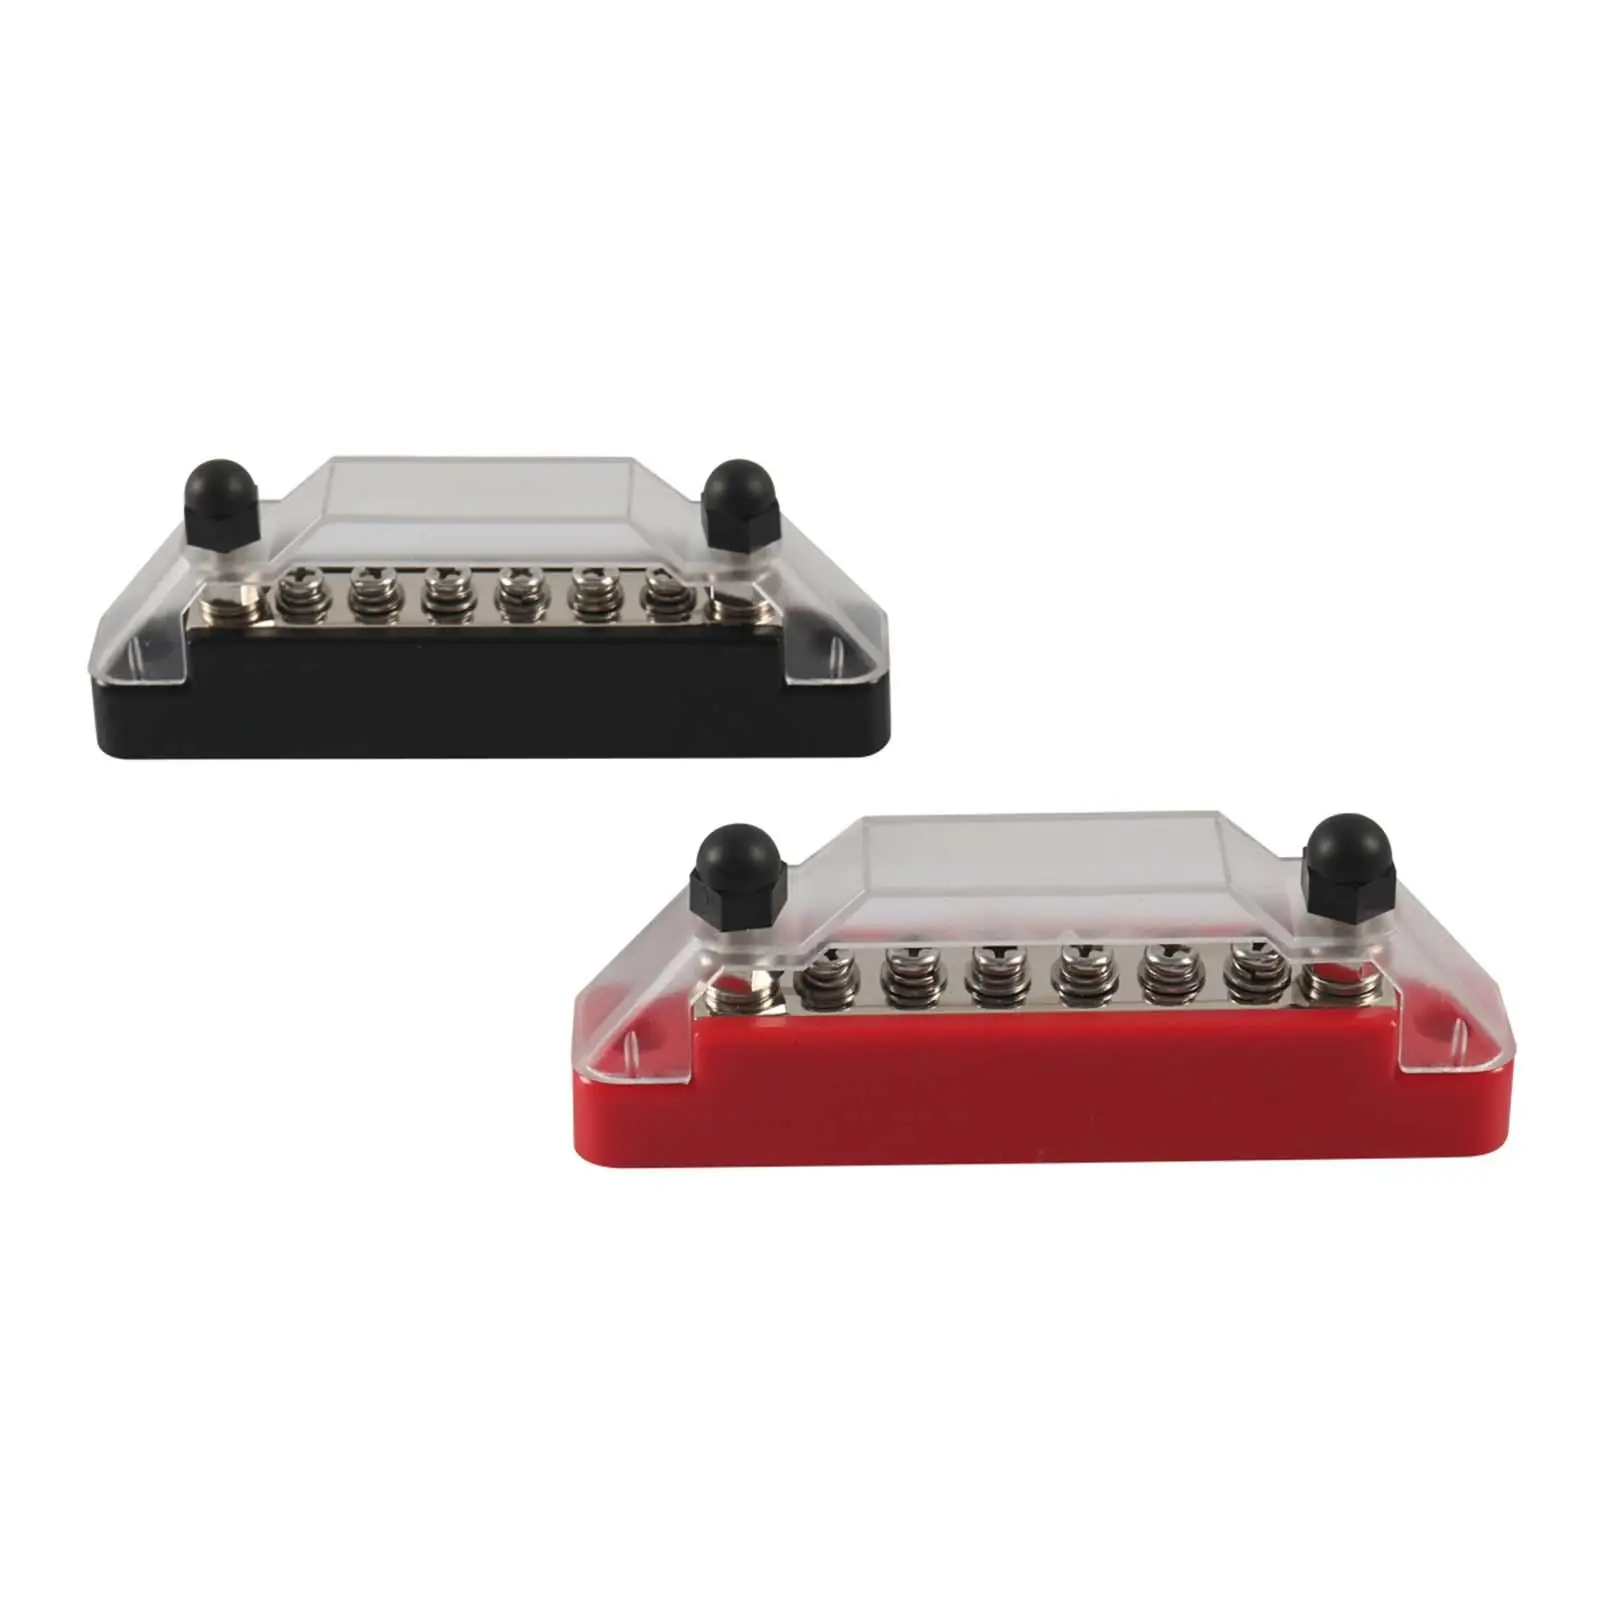 2Pcs Ground Power Distribution Block 2x M6 Studs 6x M4 Screws with Cover Bus Bar Fit for Vehicles Marine Truck Car